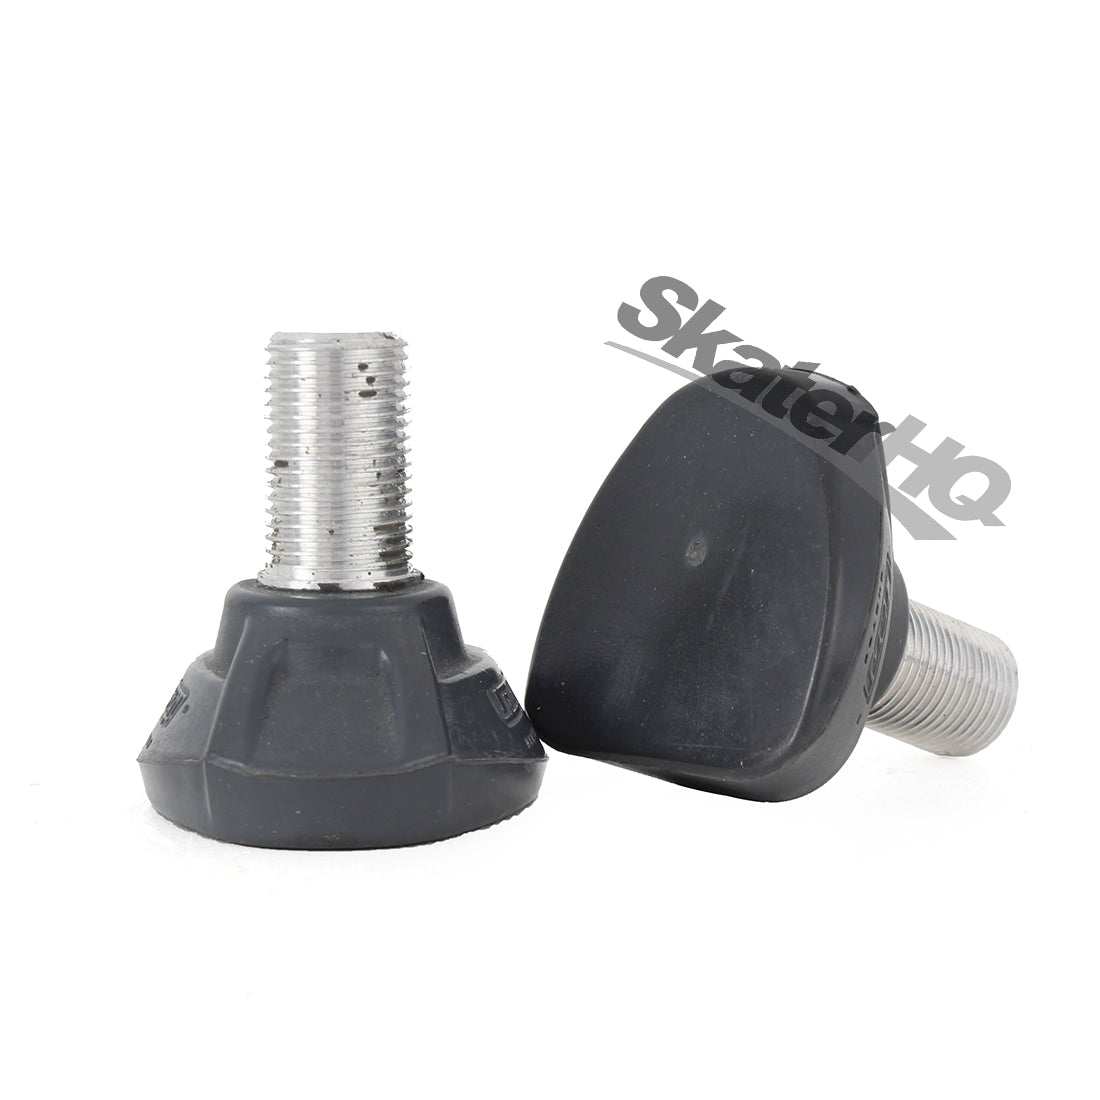 Crazy Arrow Toe Stop - Grey Roller Skate Hardware and Parts